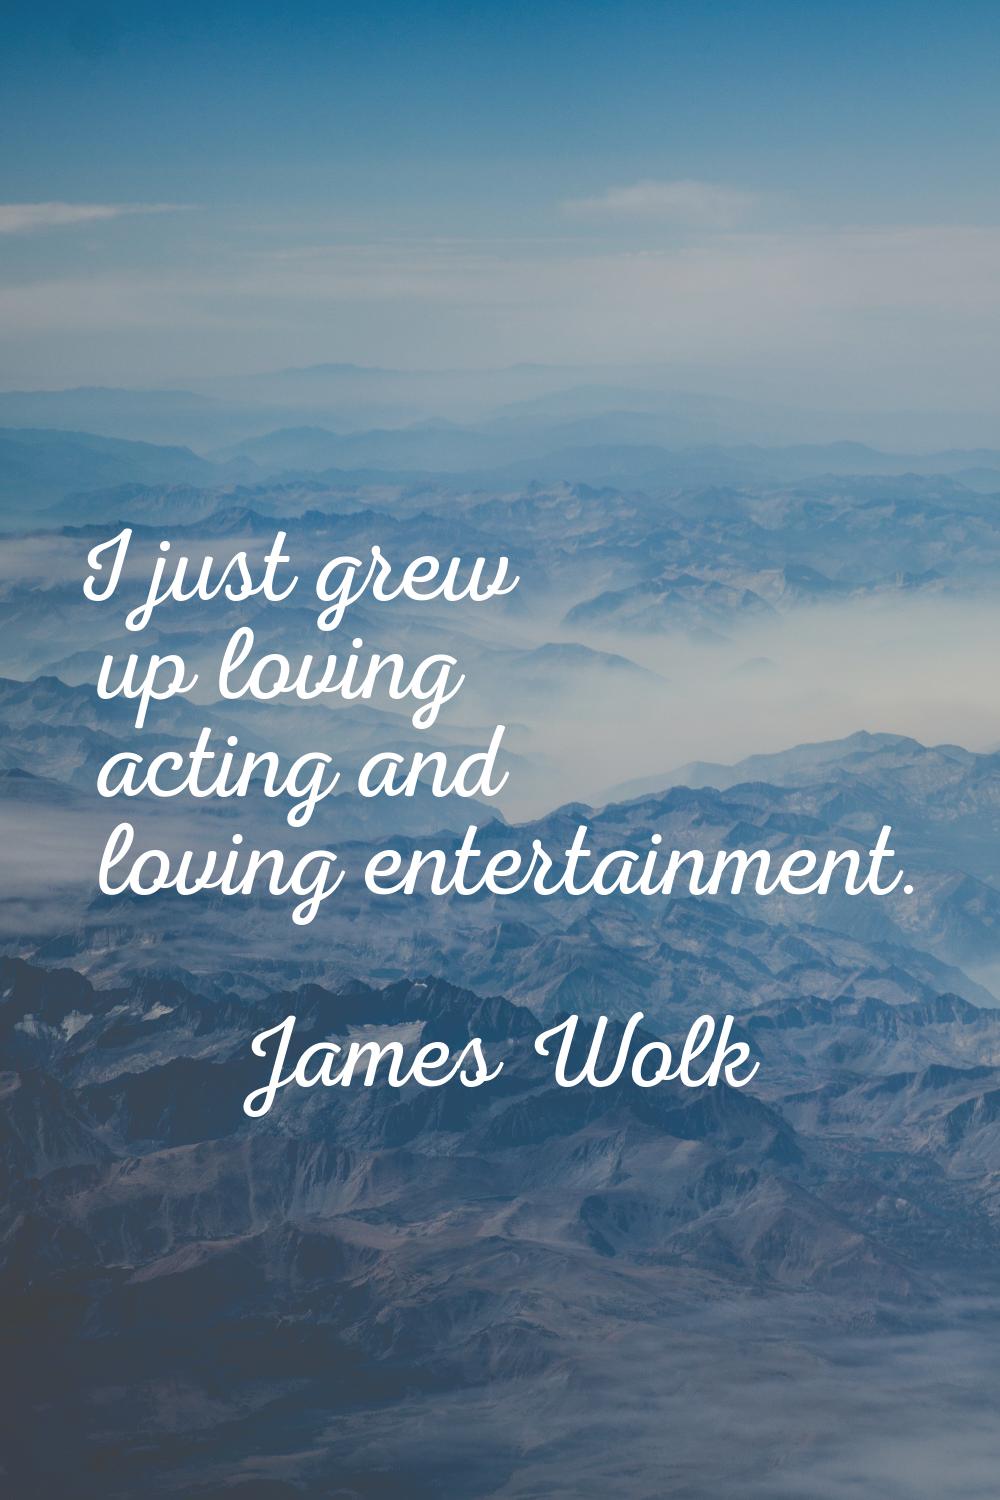 I just grew up loving acting and loving entertainment.